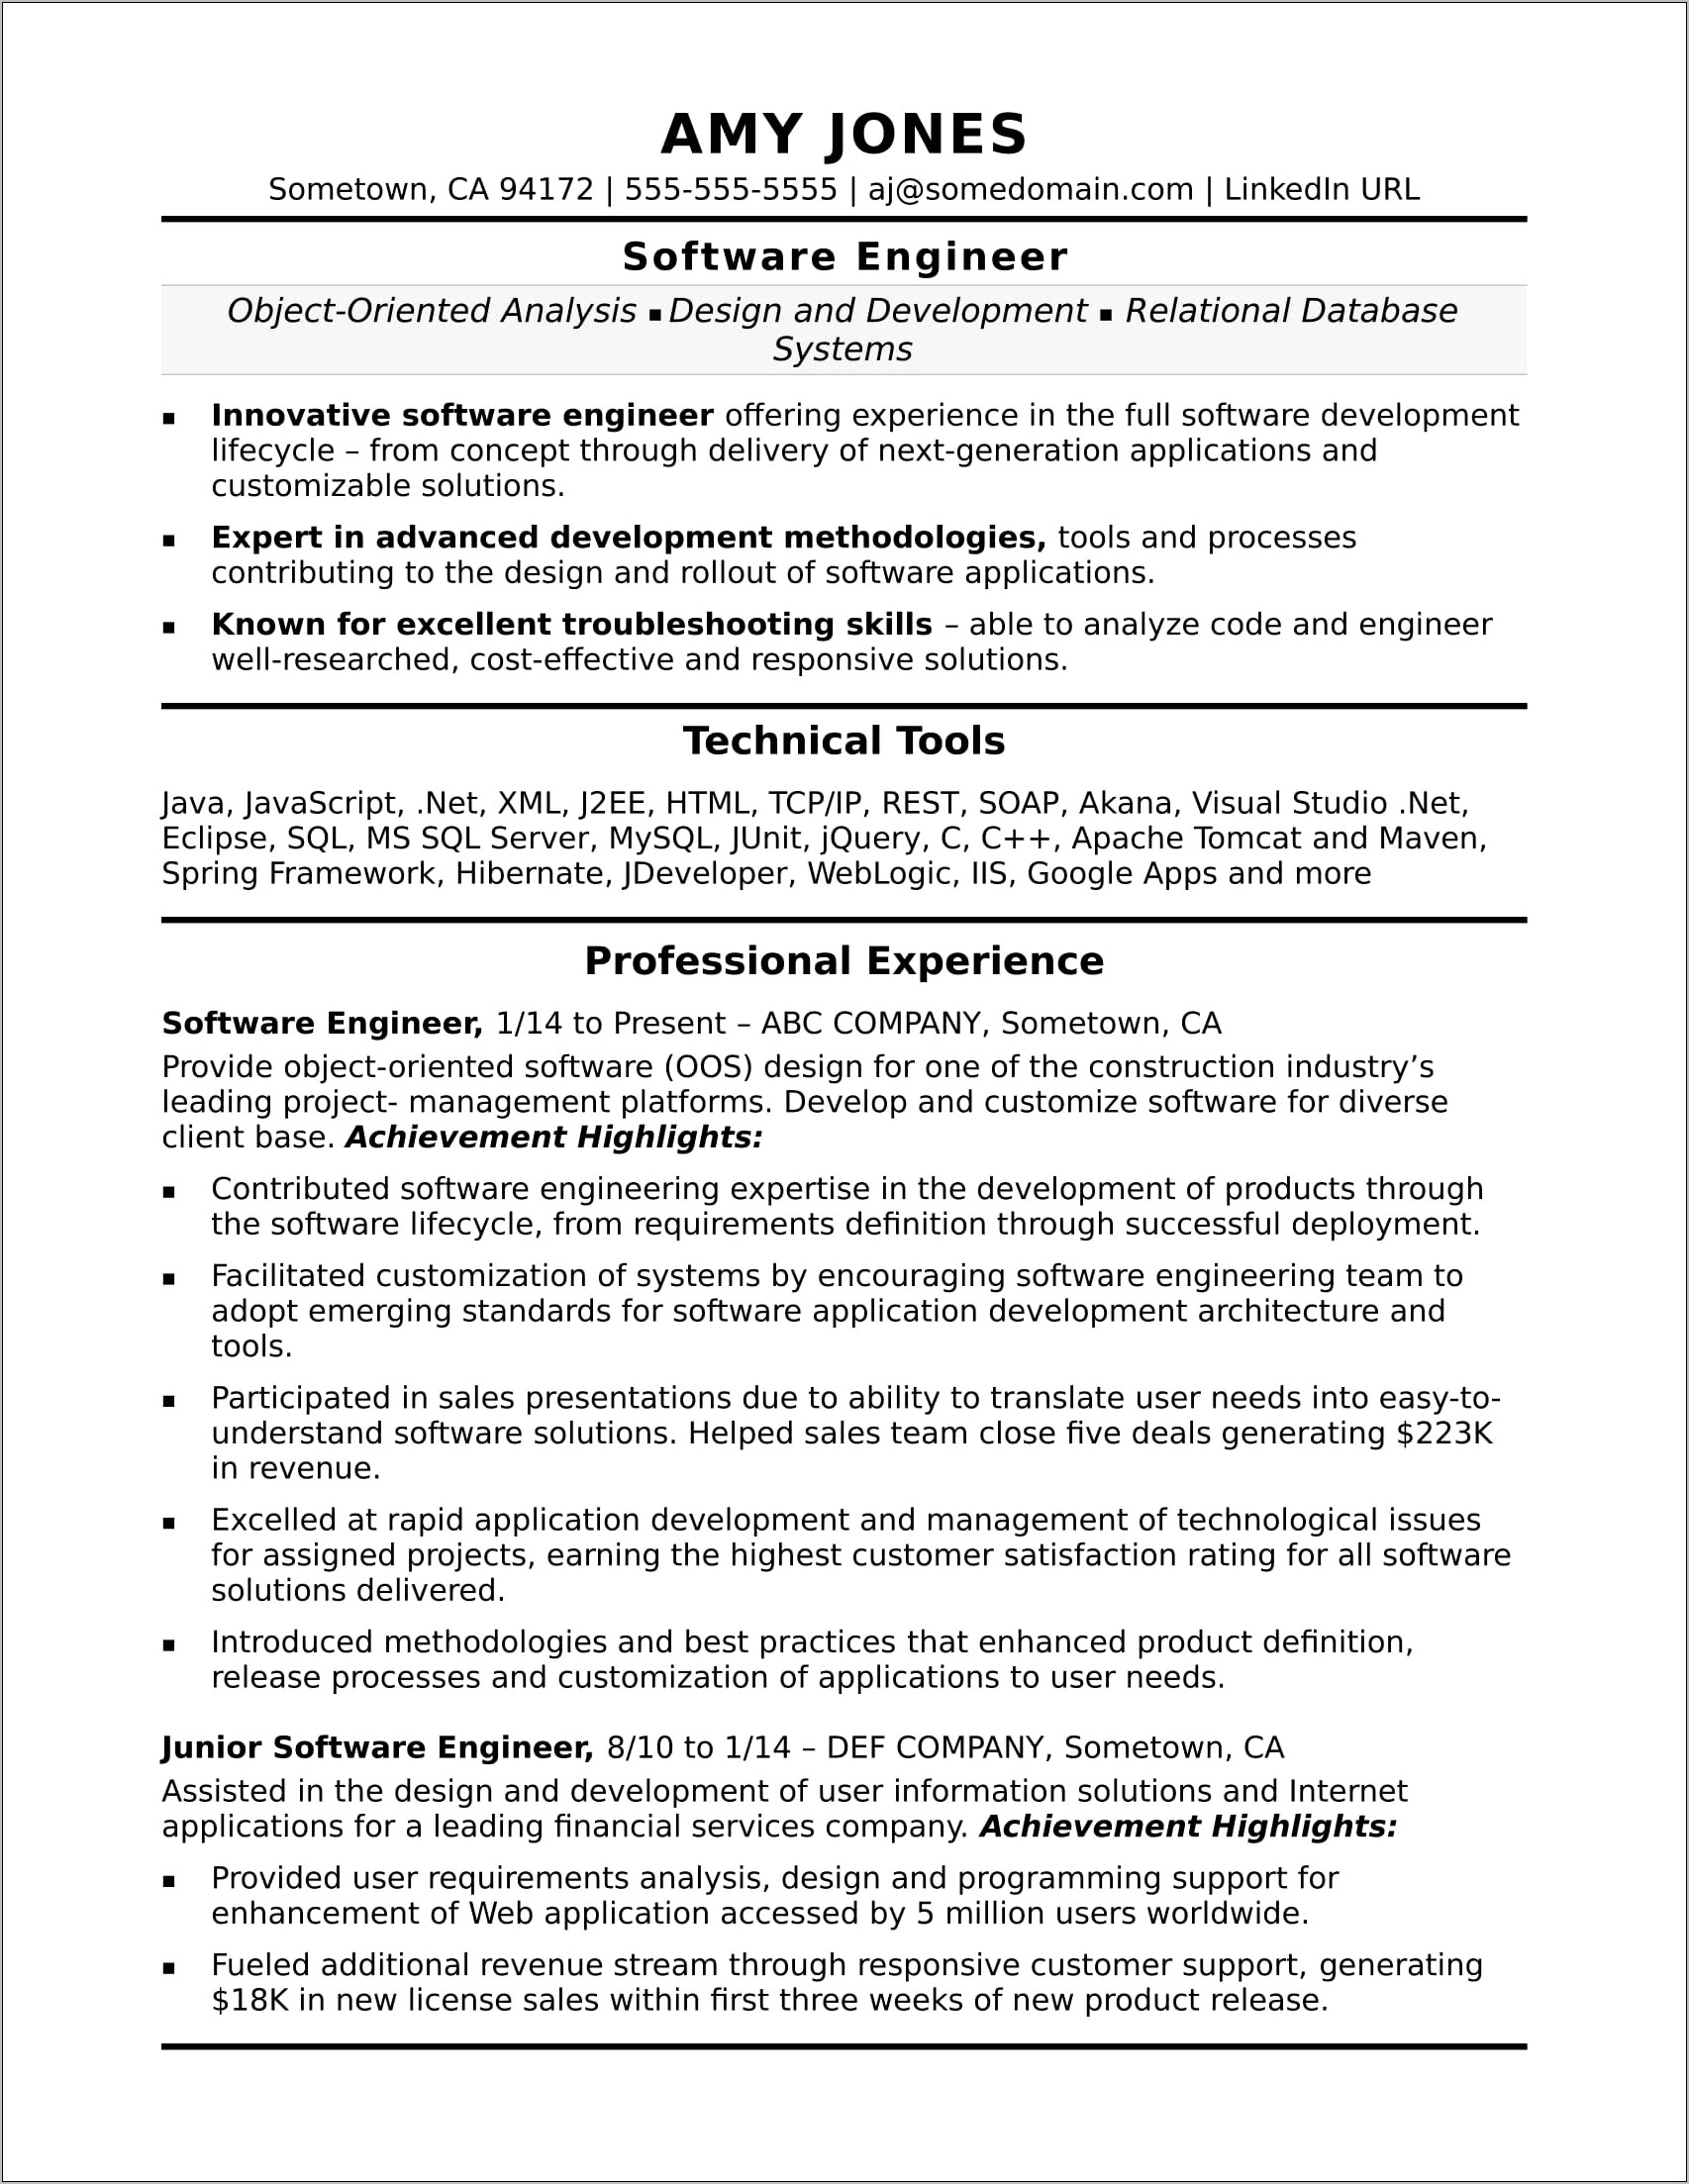 Best Format For Experiece Section Of Resume